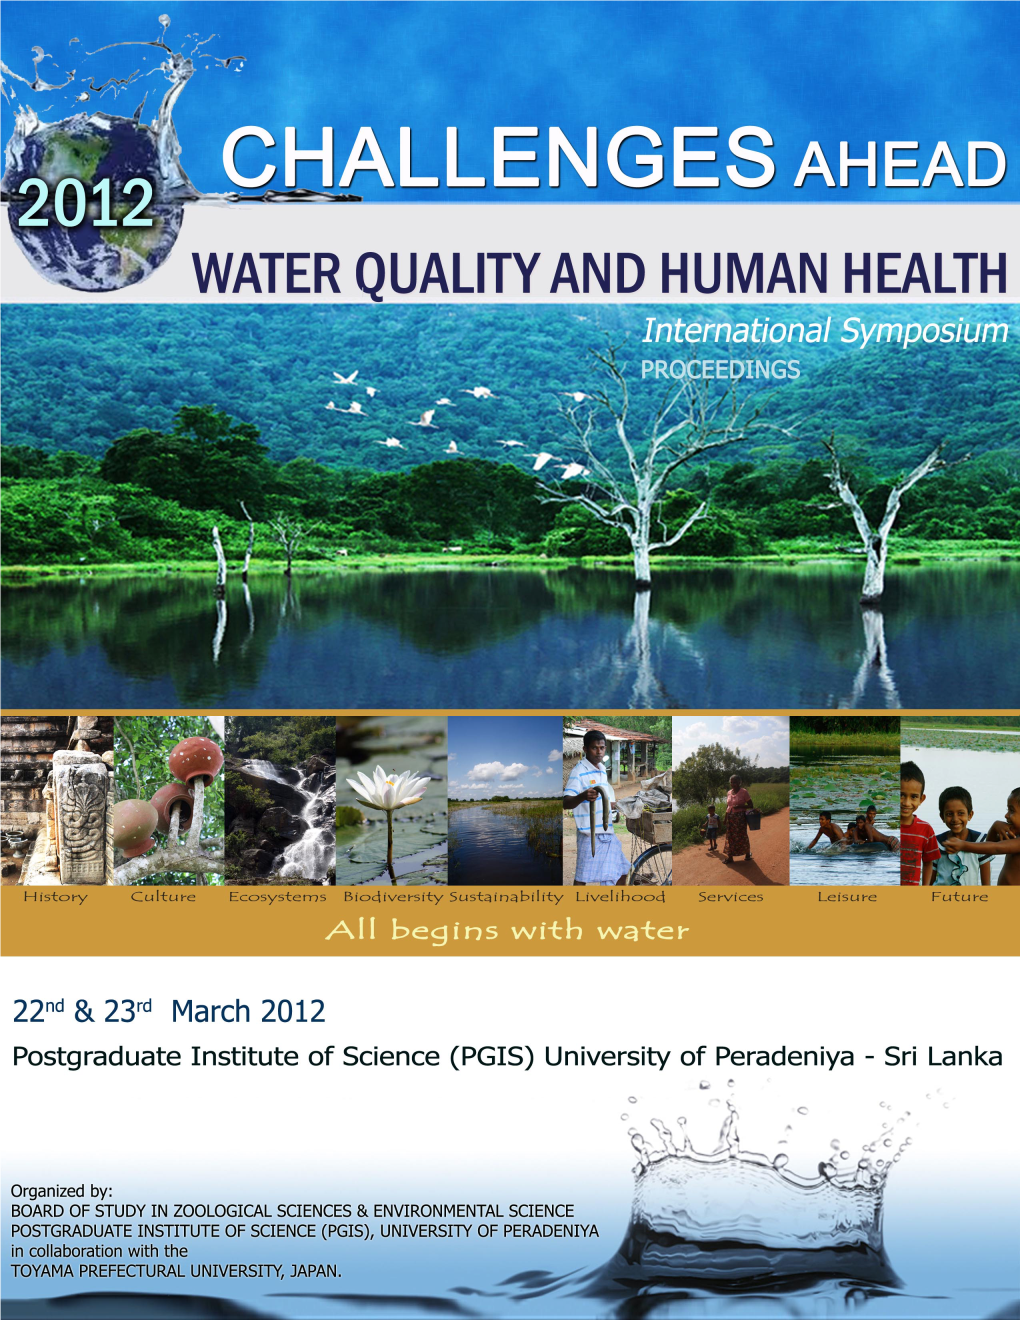 International Symposium on WATER QUALITY and HUMAN HEALTH: CHALLENGES AHEAD